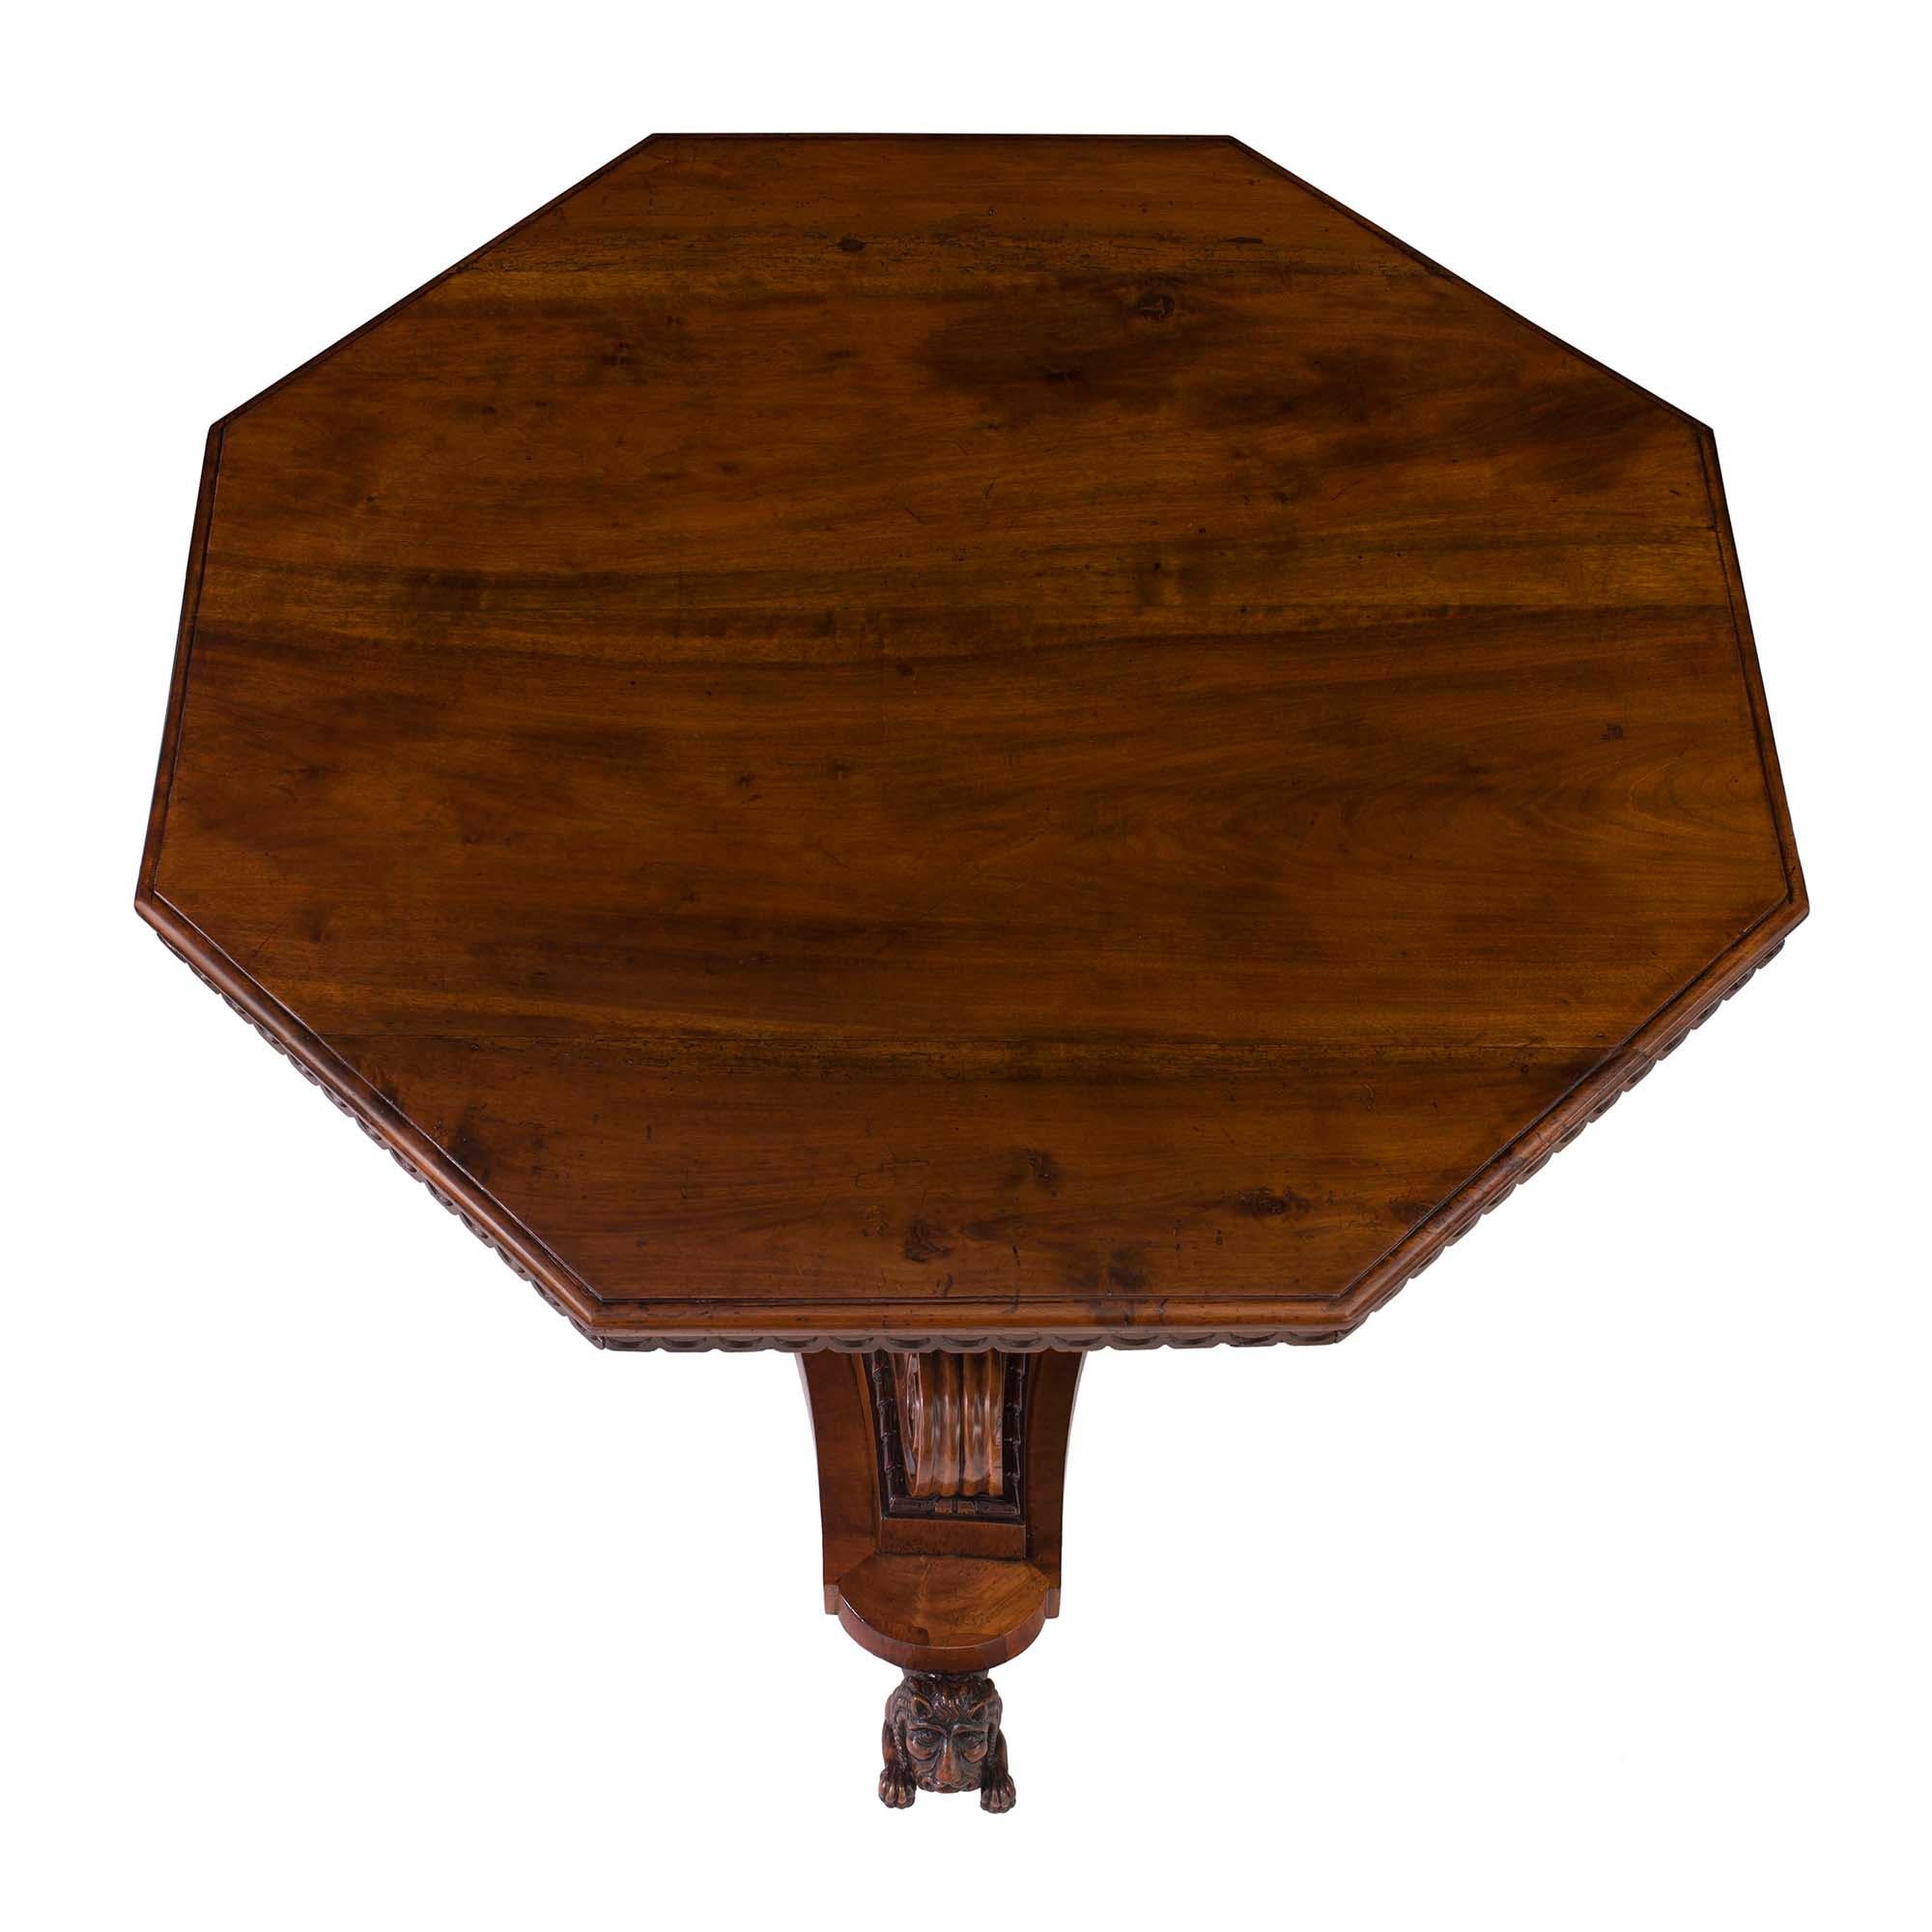 A monumental Italian 18th-century Tuscan octagonal walnut center table. The table is raised on three intricately carved lion-shaped feet below a fluted triangular base with concave sides. Above each of the three lions, a substantial scrolled carving